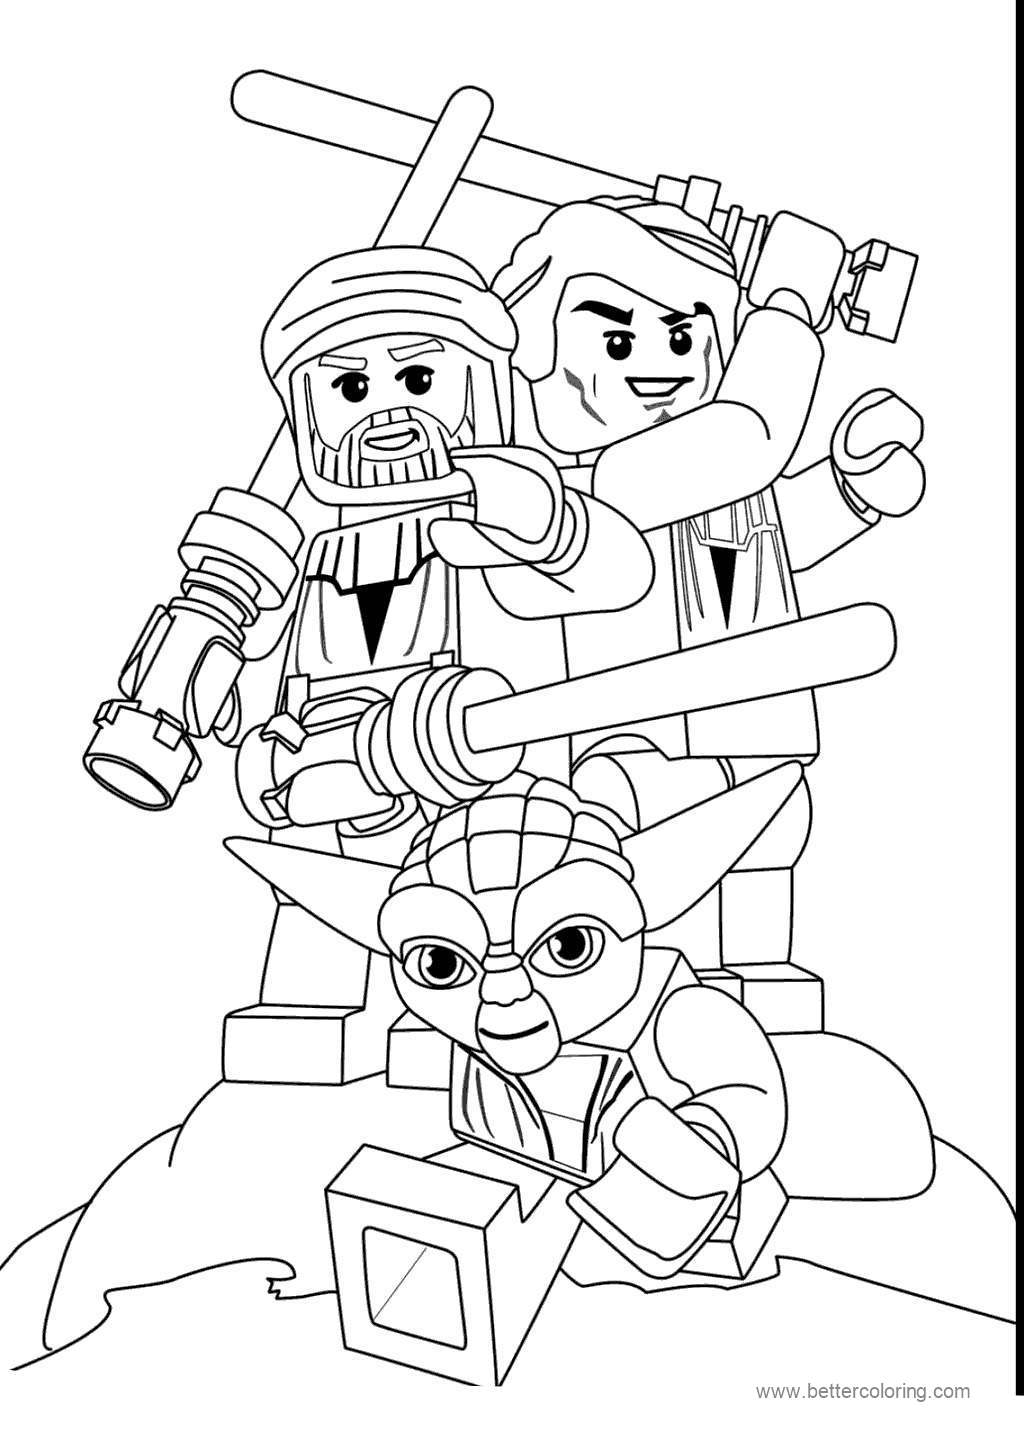 Free Lego Movie Star Wars Coloring Pages printable